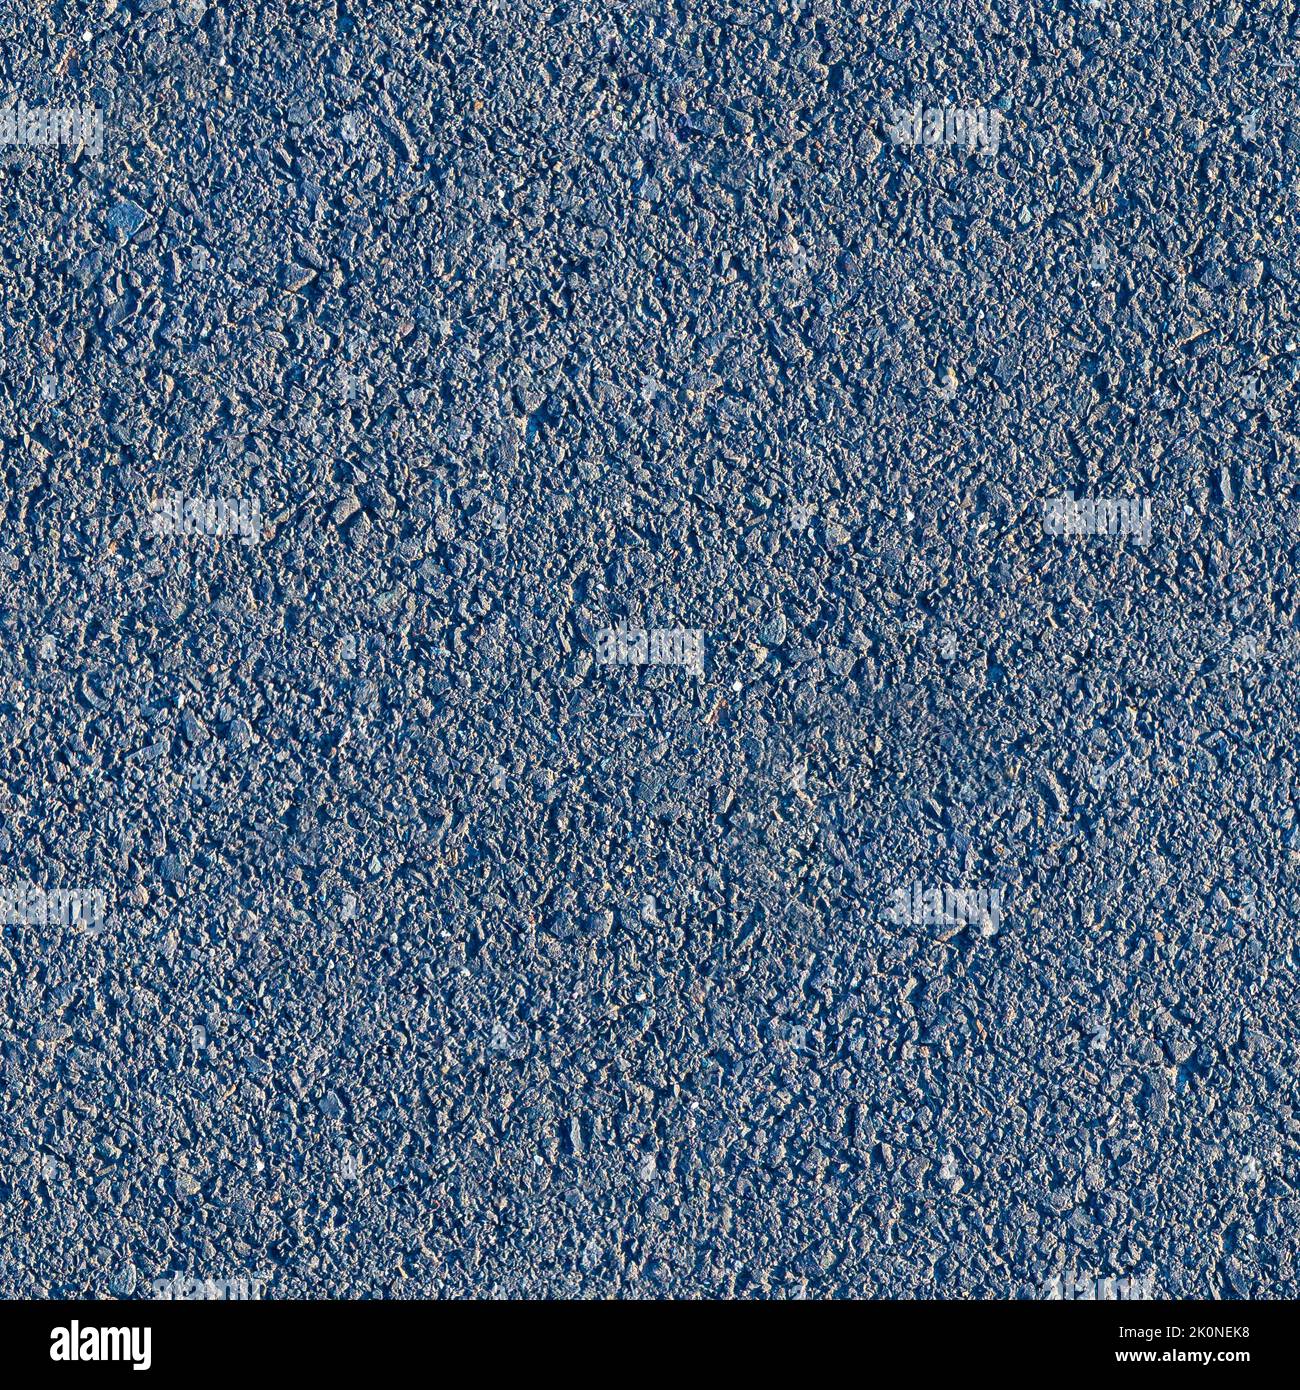 seamless texture of the new black asphalt laid during the repair of the road or sidewalk Stock Photo